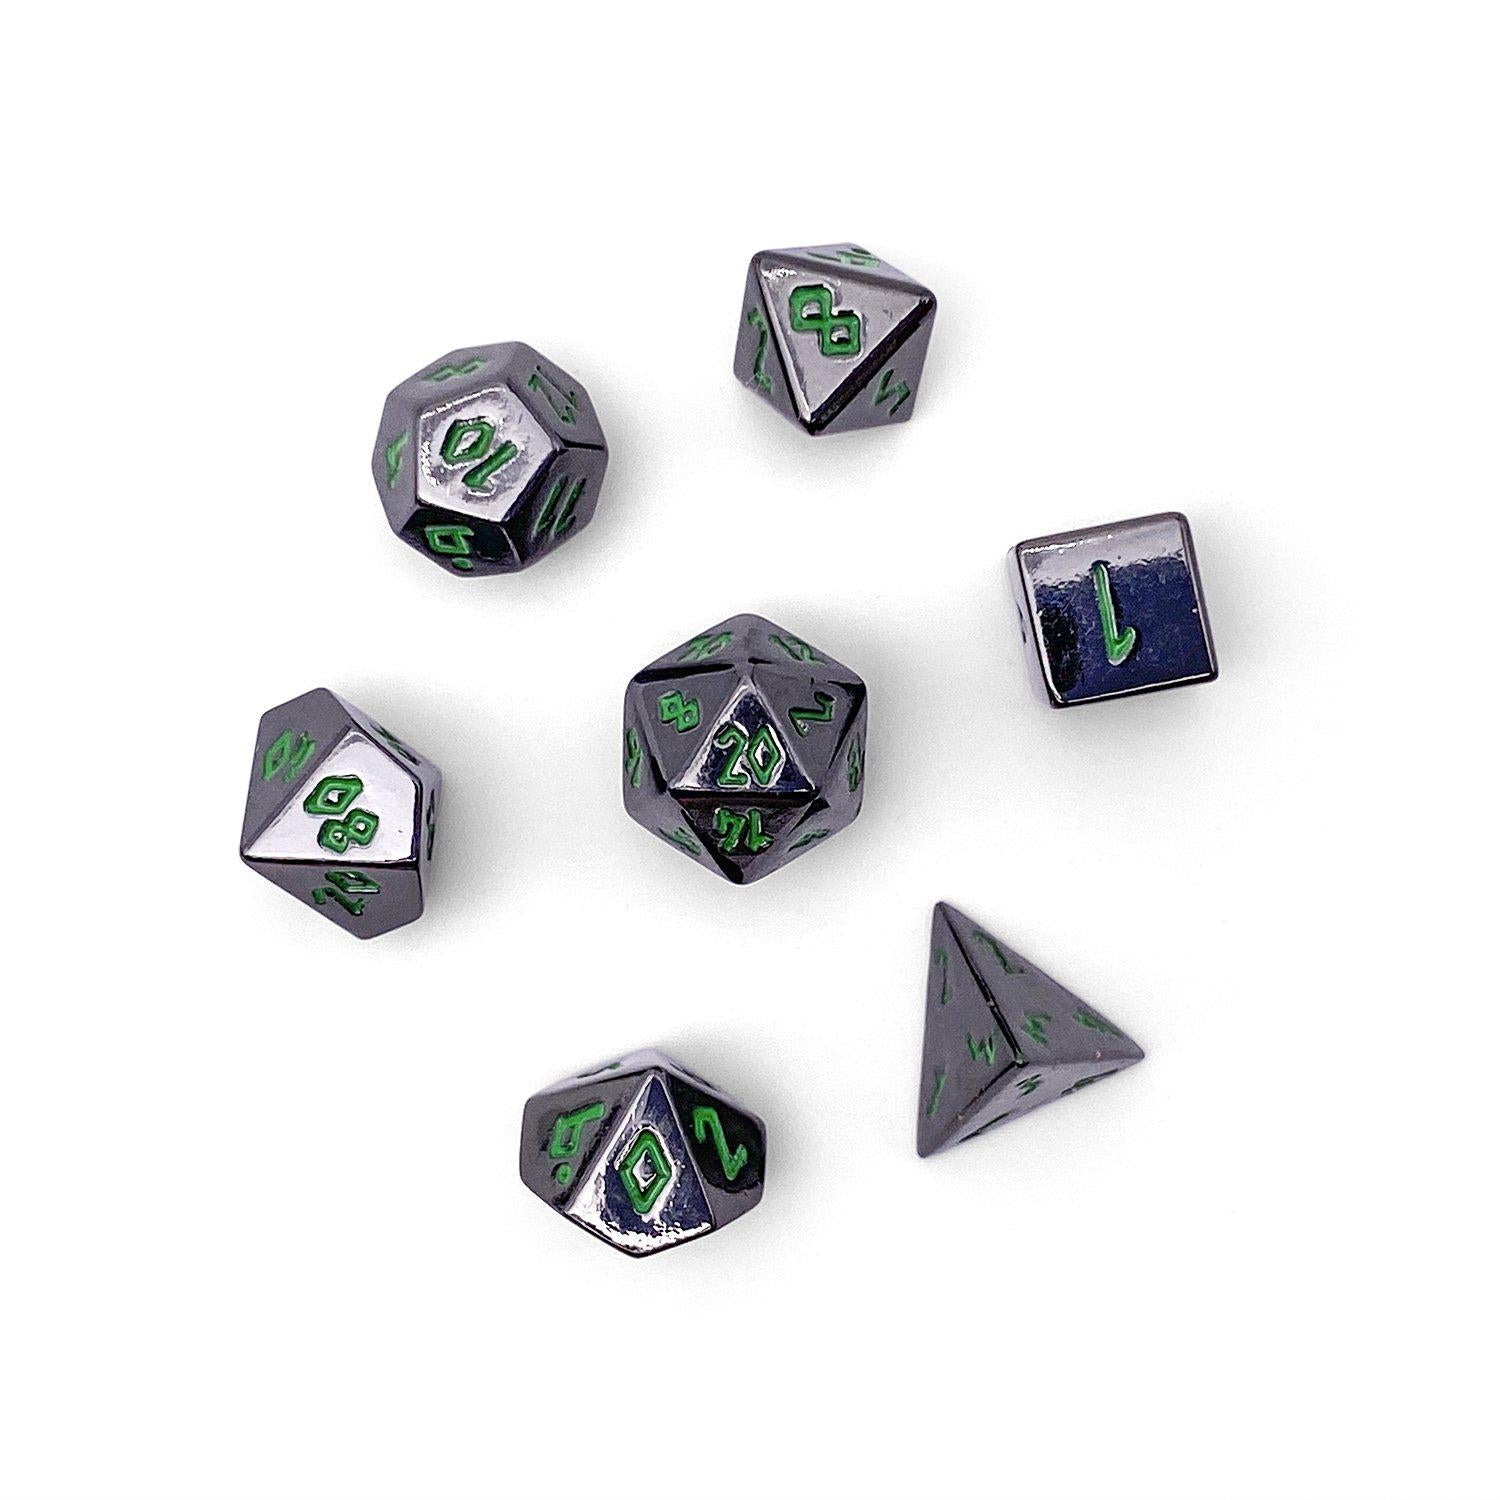 Poisoned Daggers Pebble™ Dice - 10mm Alloy Mini Polyhedral Dice Set